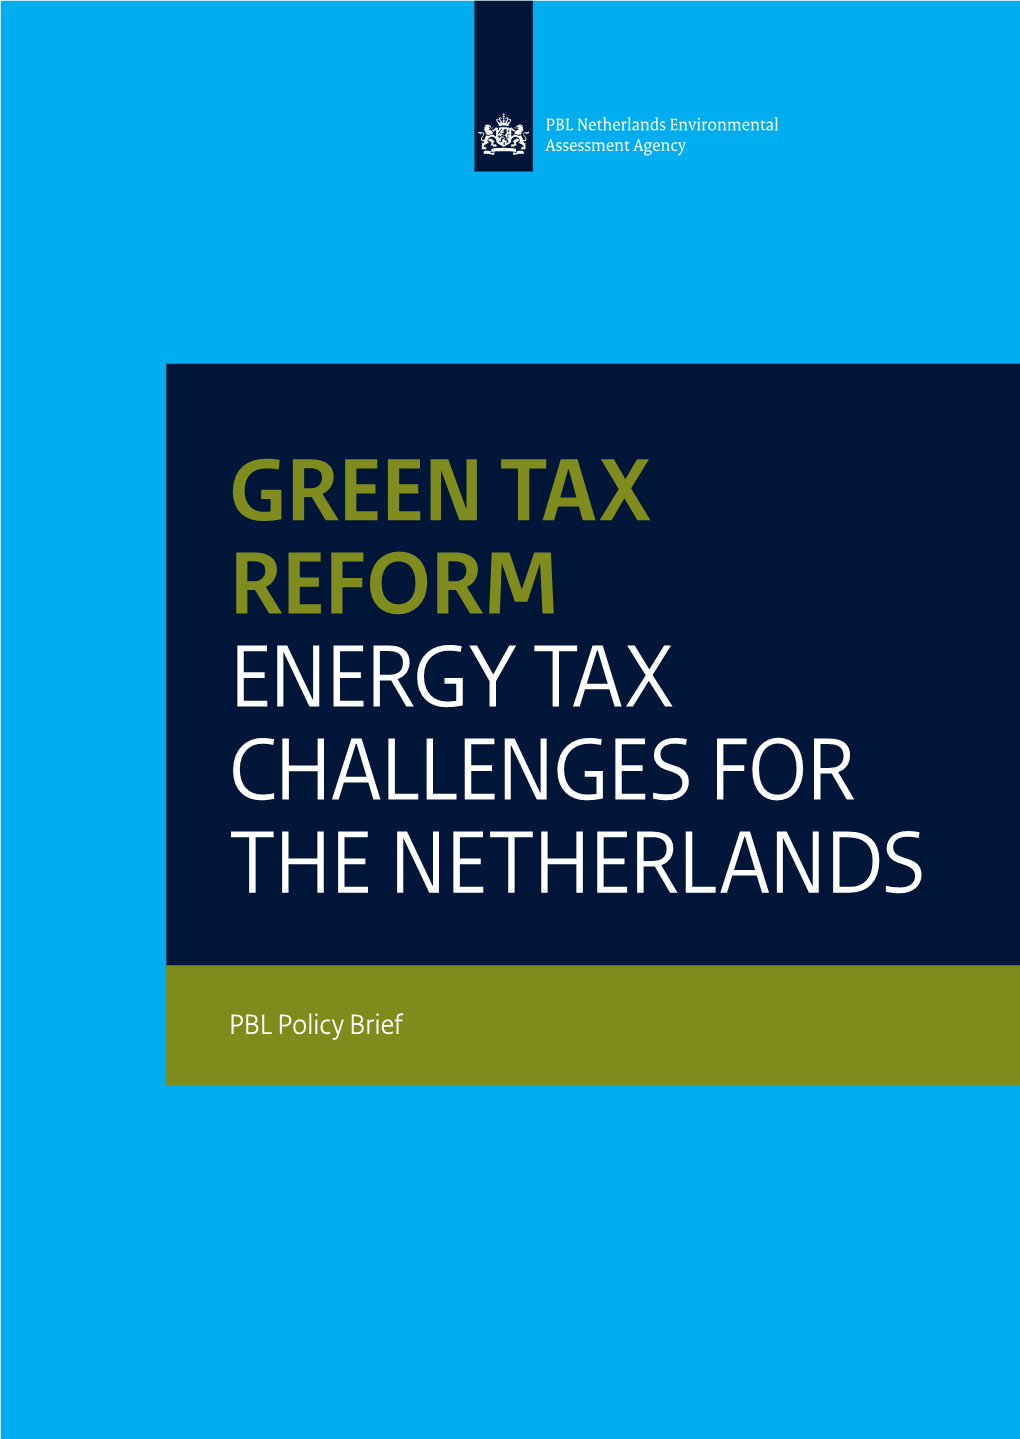 Green Tax Reform: Energy Tax Challenges for the Netherlands © PBL Netherlands Environmental Assessment Agency the Hague, 2014 PBL Publication Number: 1501